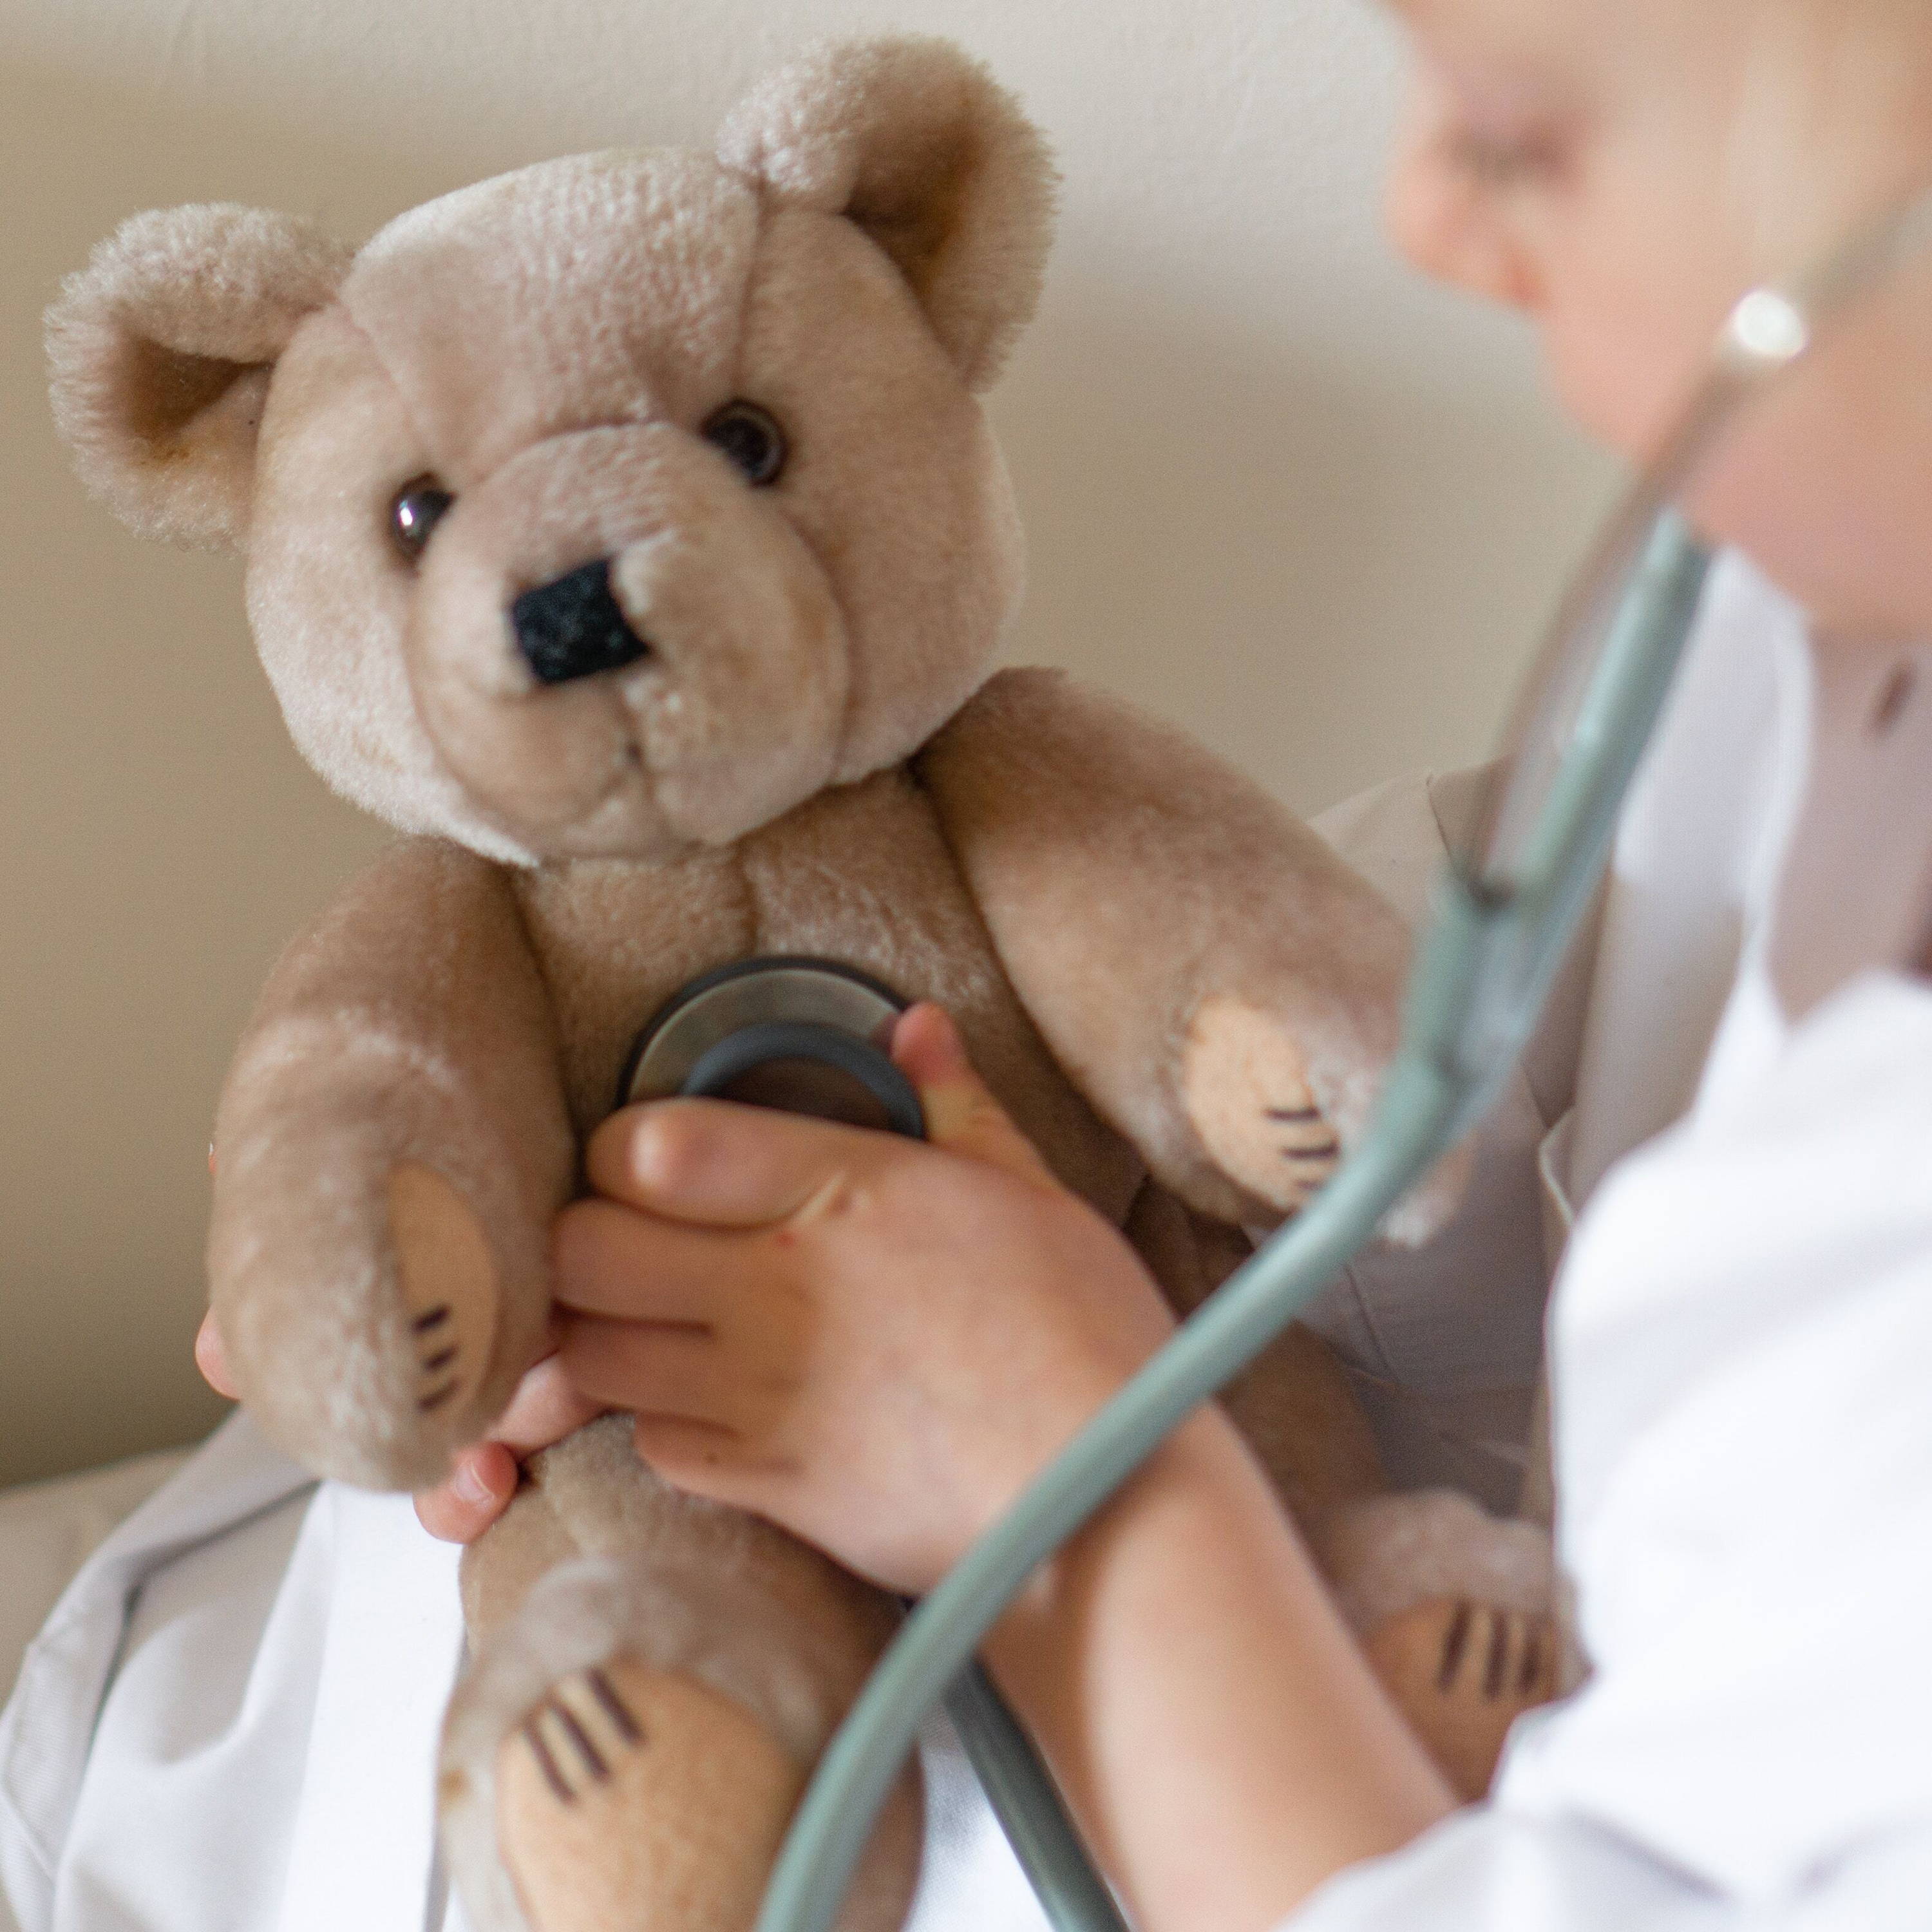 Child in a white coat playing at being a doctor – they’re using a stethoscope to examine their teddy bear